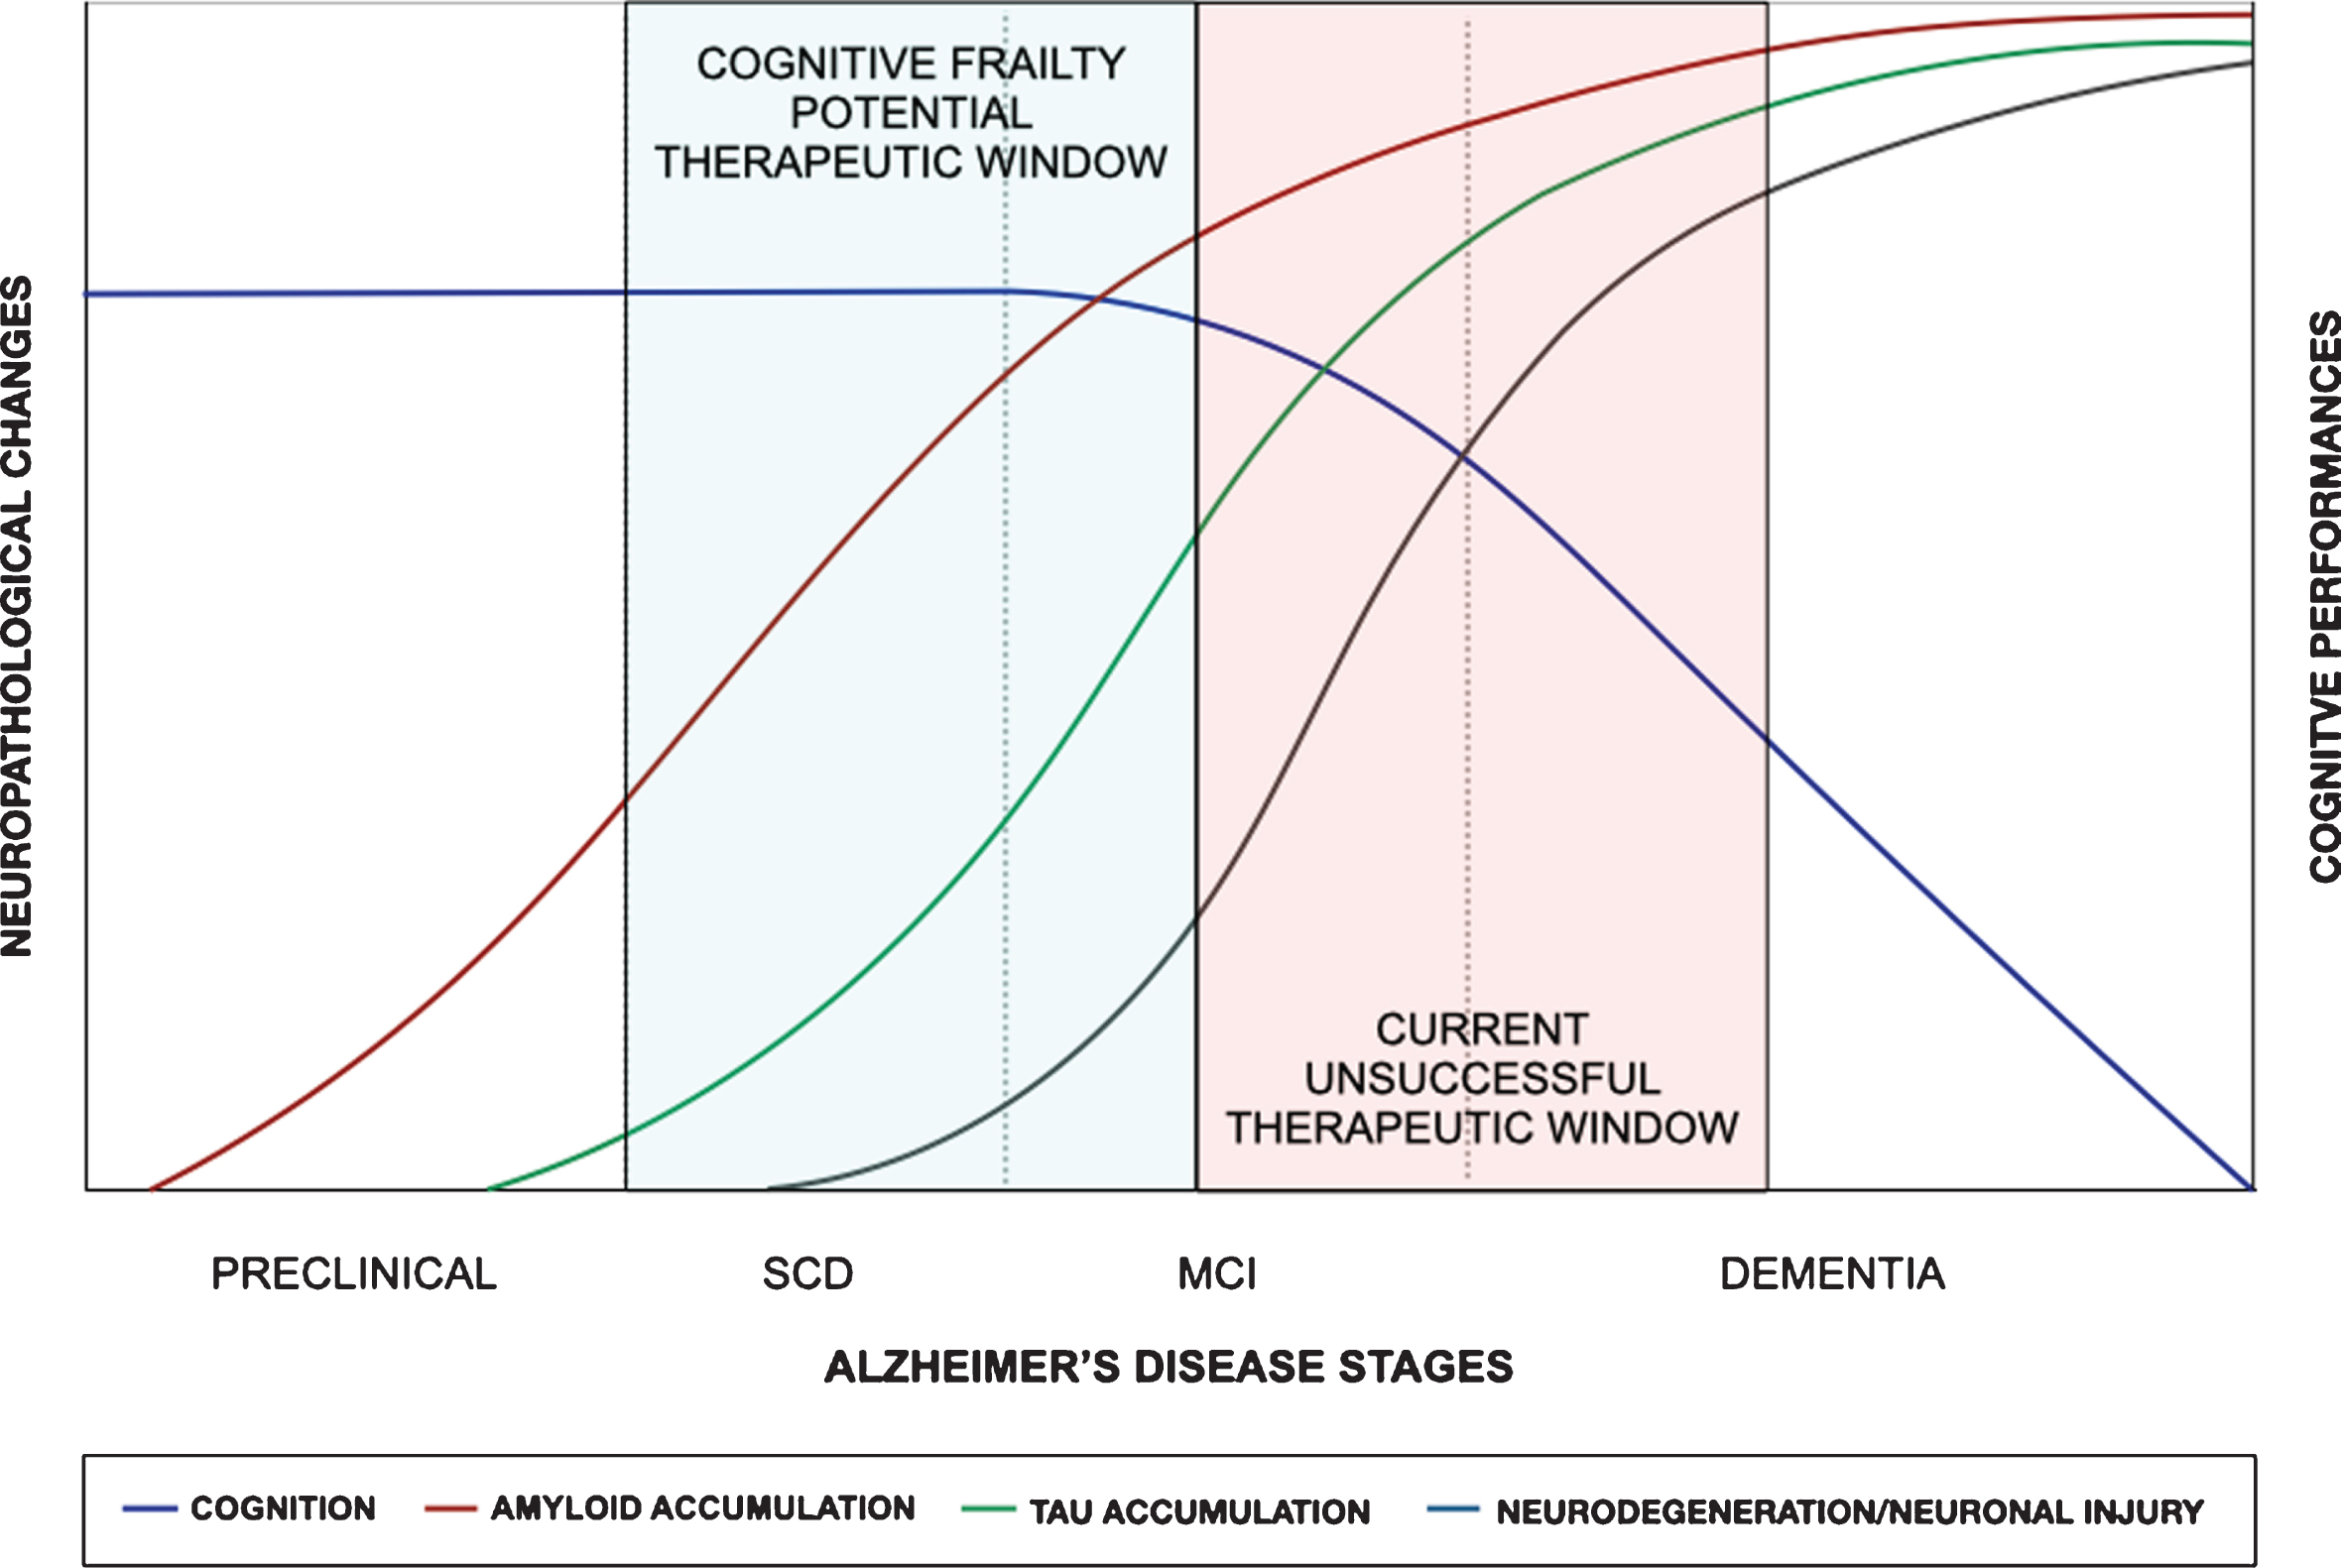 Cognitive frailty and the natural history of Alzheimer’s disease (AD). Here is schematically depicted the natural history of AD with the supposed timing of neuropathological changes in relation to the cognitive decline [59]. The definition of patients with subjective cognitive decline (SCD) and early mild cognitive impairment (MCI) at risk of dementia in the cognitive frailty stage could offer a potential therapeutic window to overcome the limitations of the current unsuccessful therapeutic window of late MCI and early dementia.